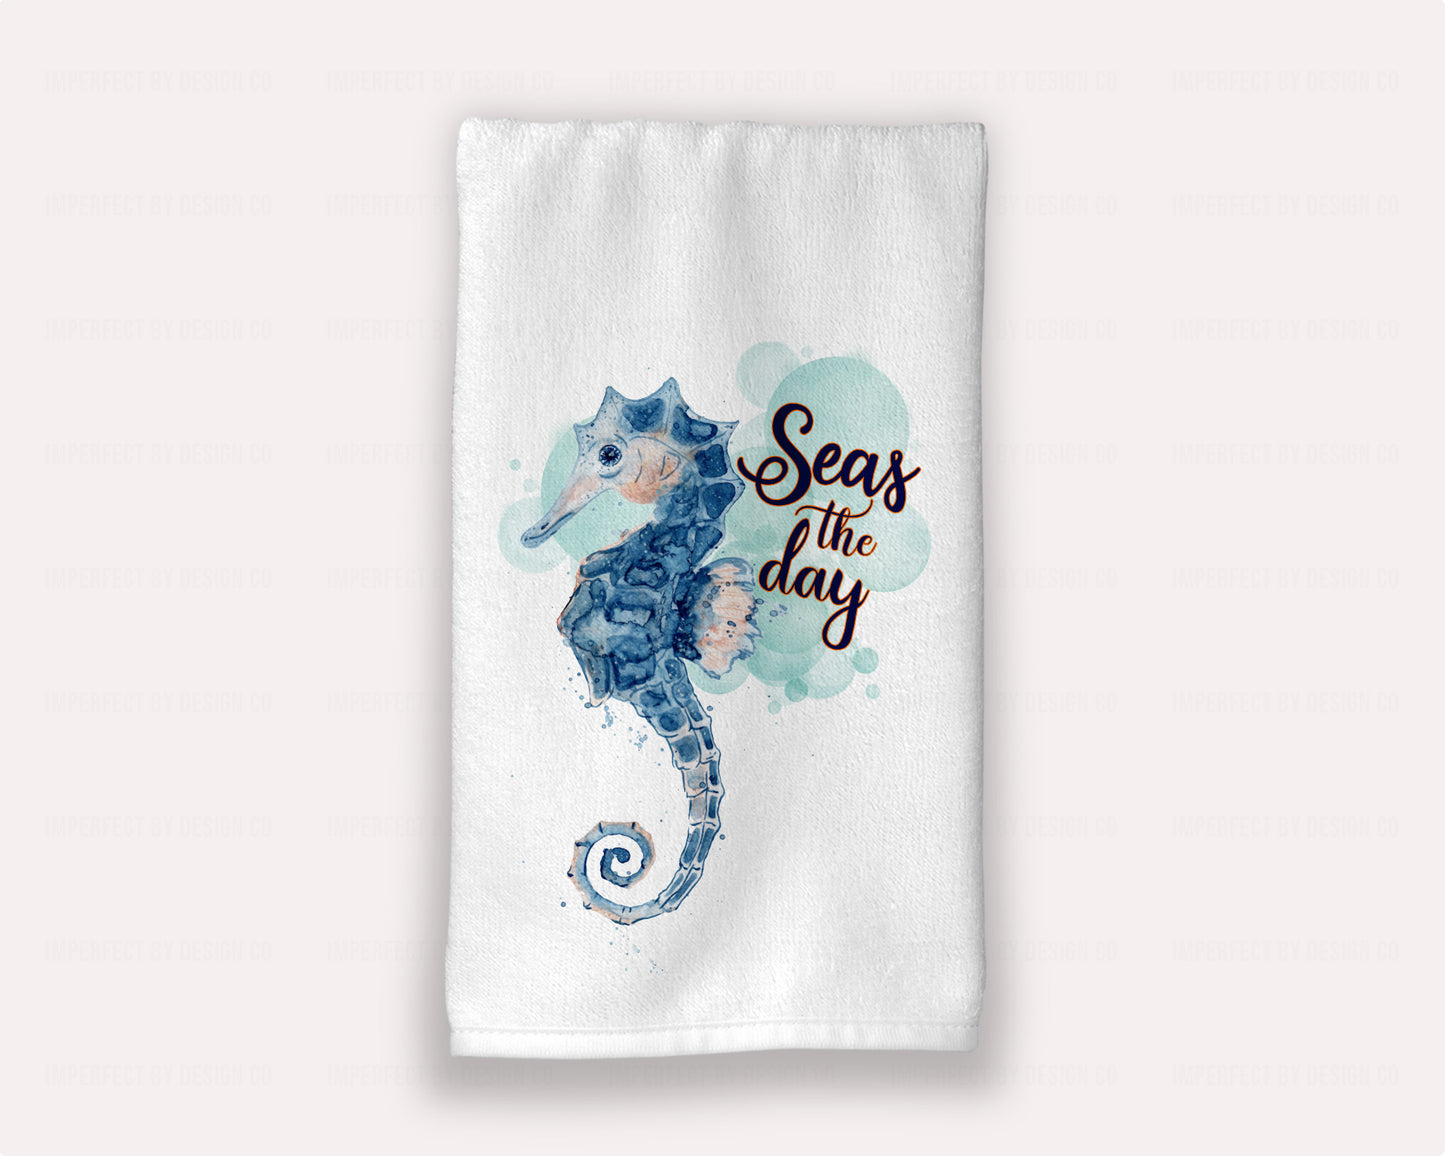 Luxurious white guest hand towel from the Coastal Vibes Collection with watercolor seahorse, “Seas the day” | imperfect by design co